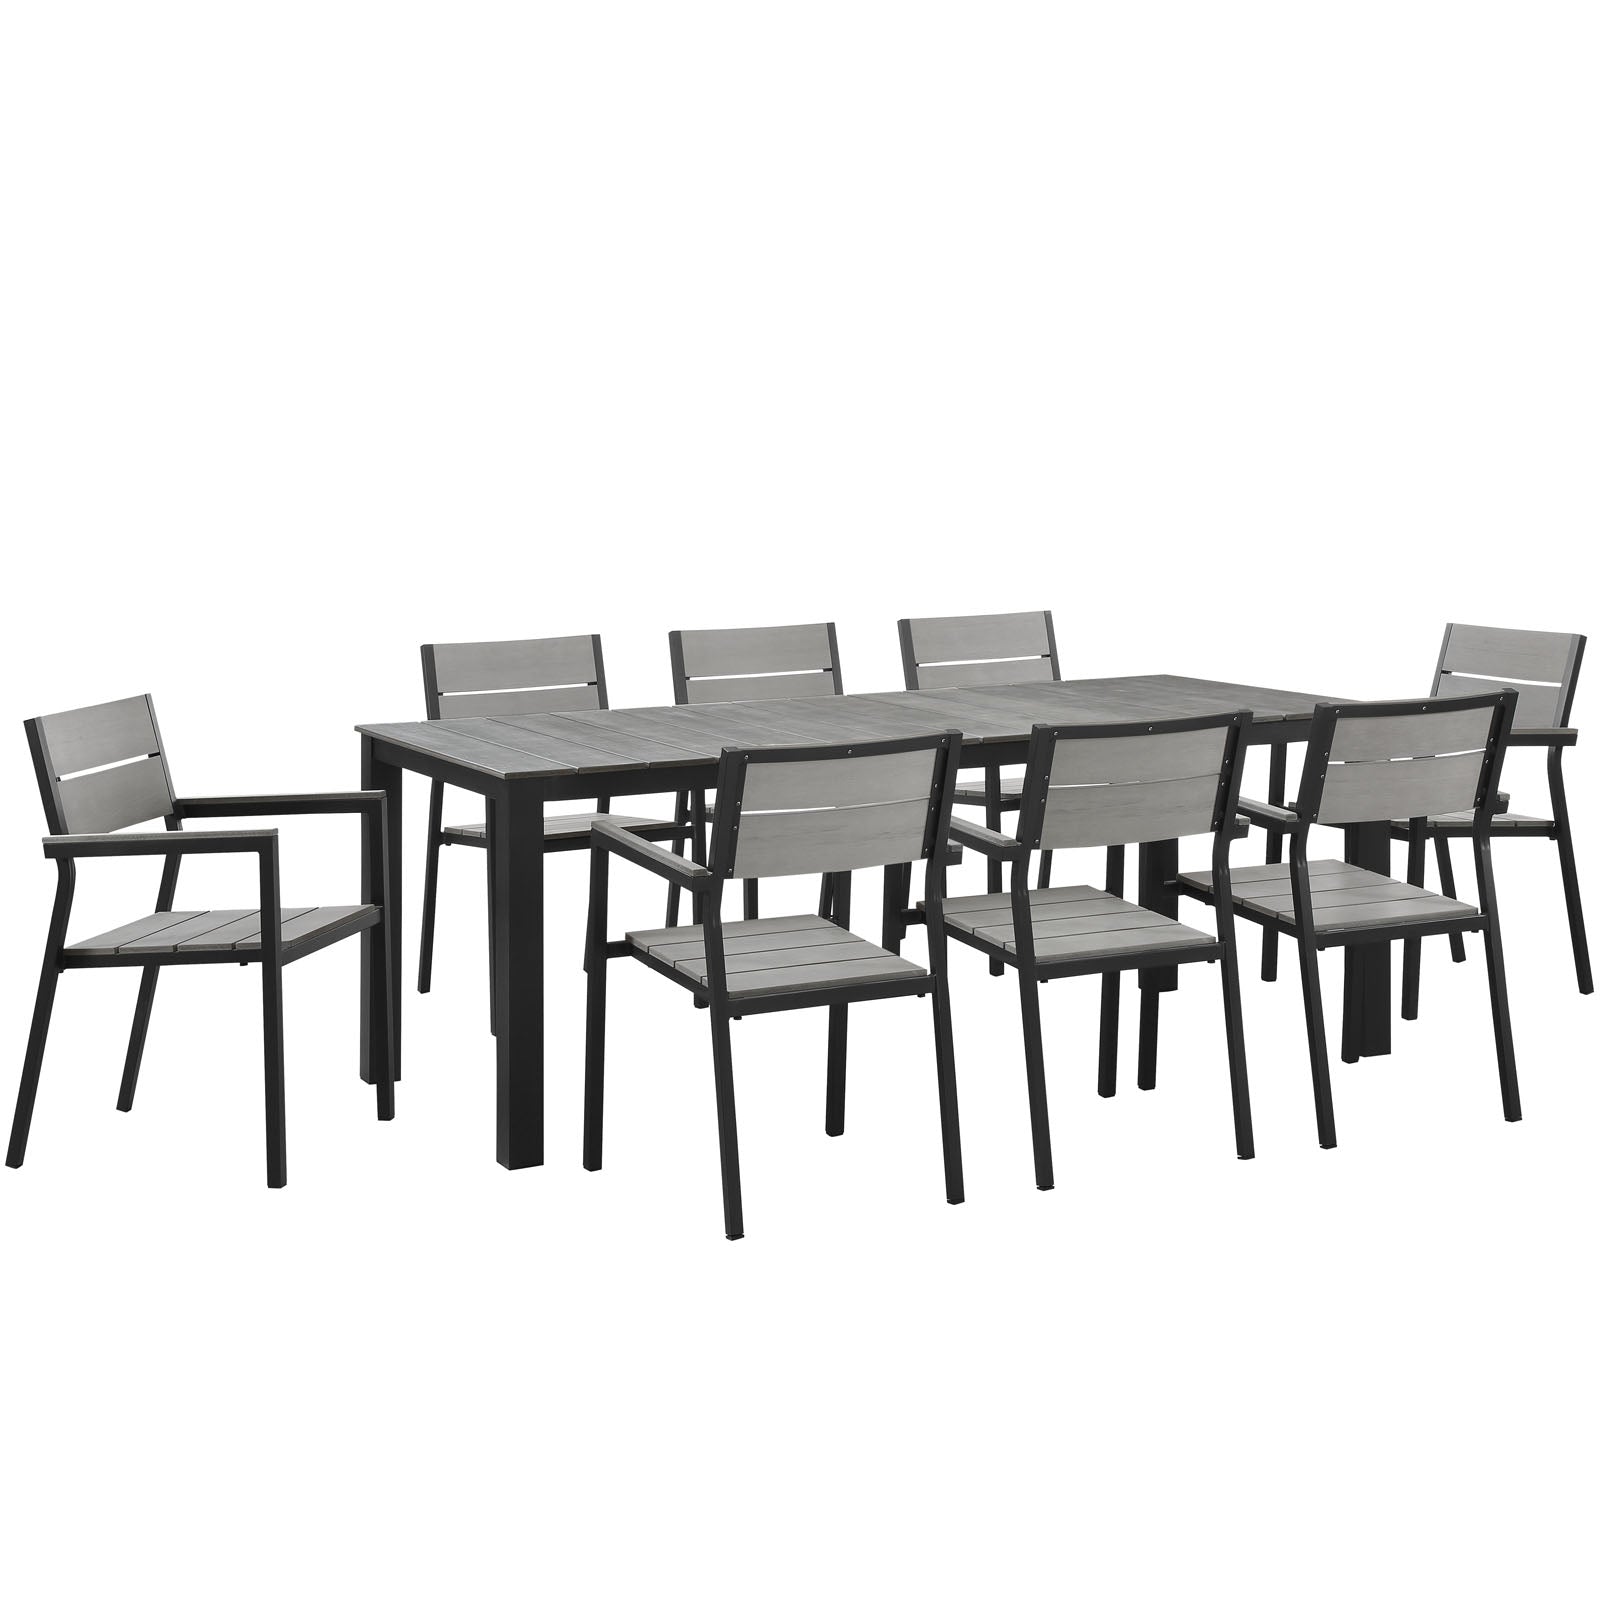 Maine 9 Piece Outdoor Patio Dining Set - East Shore Modern Home Furnishings